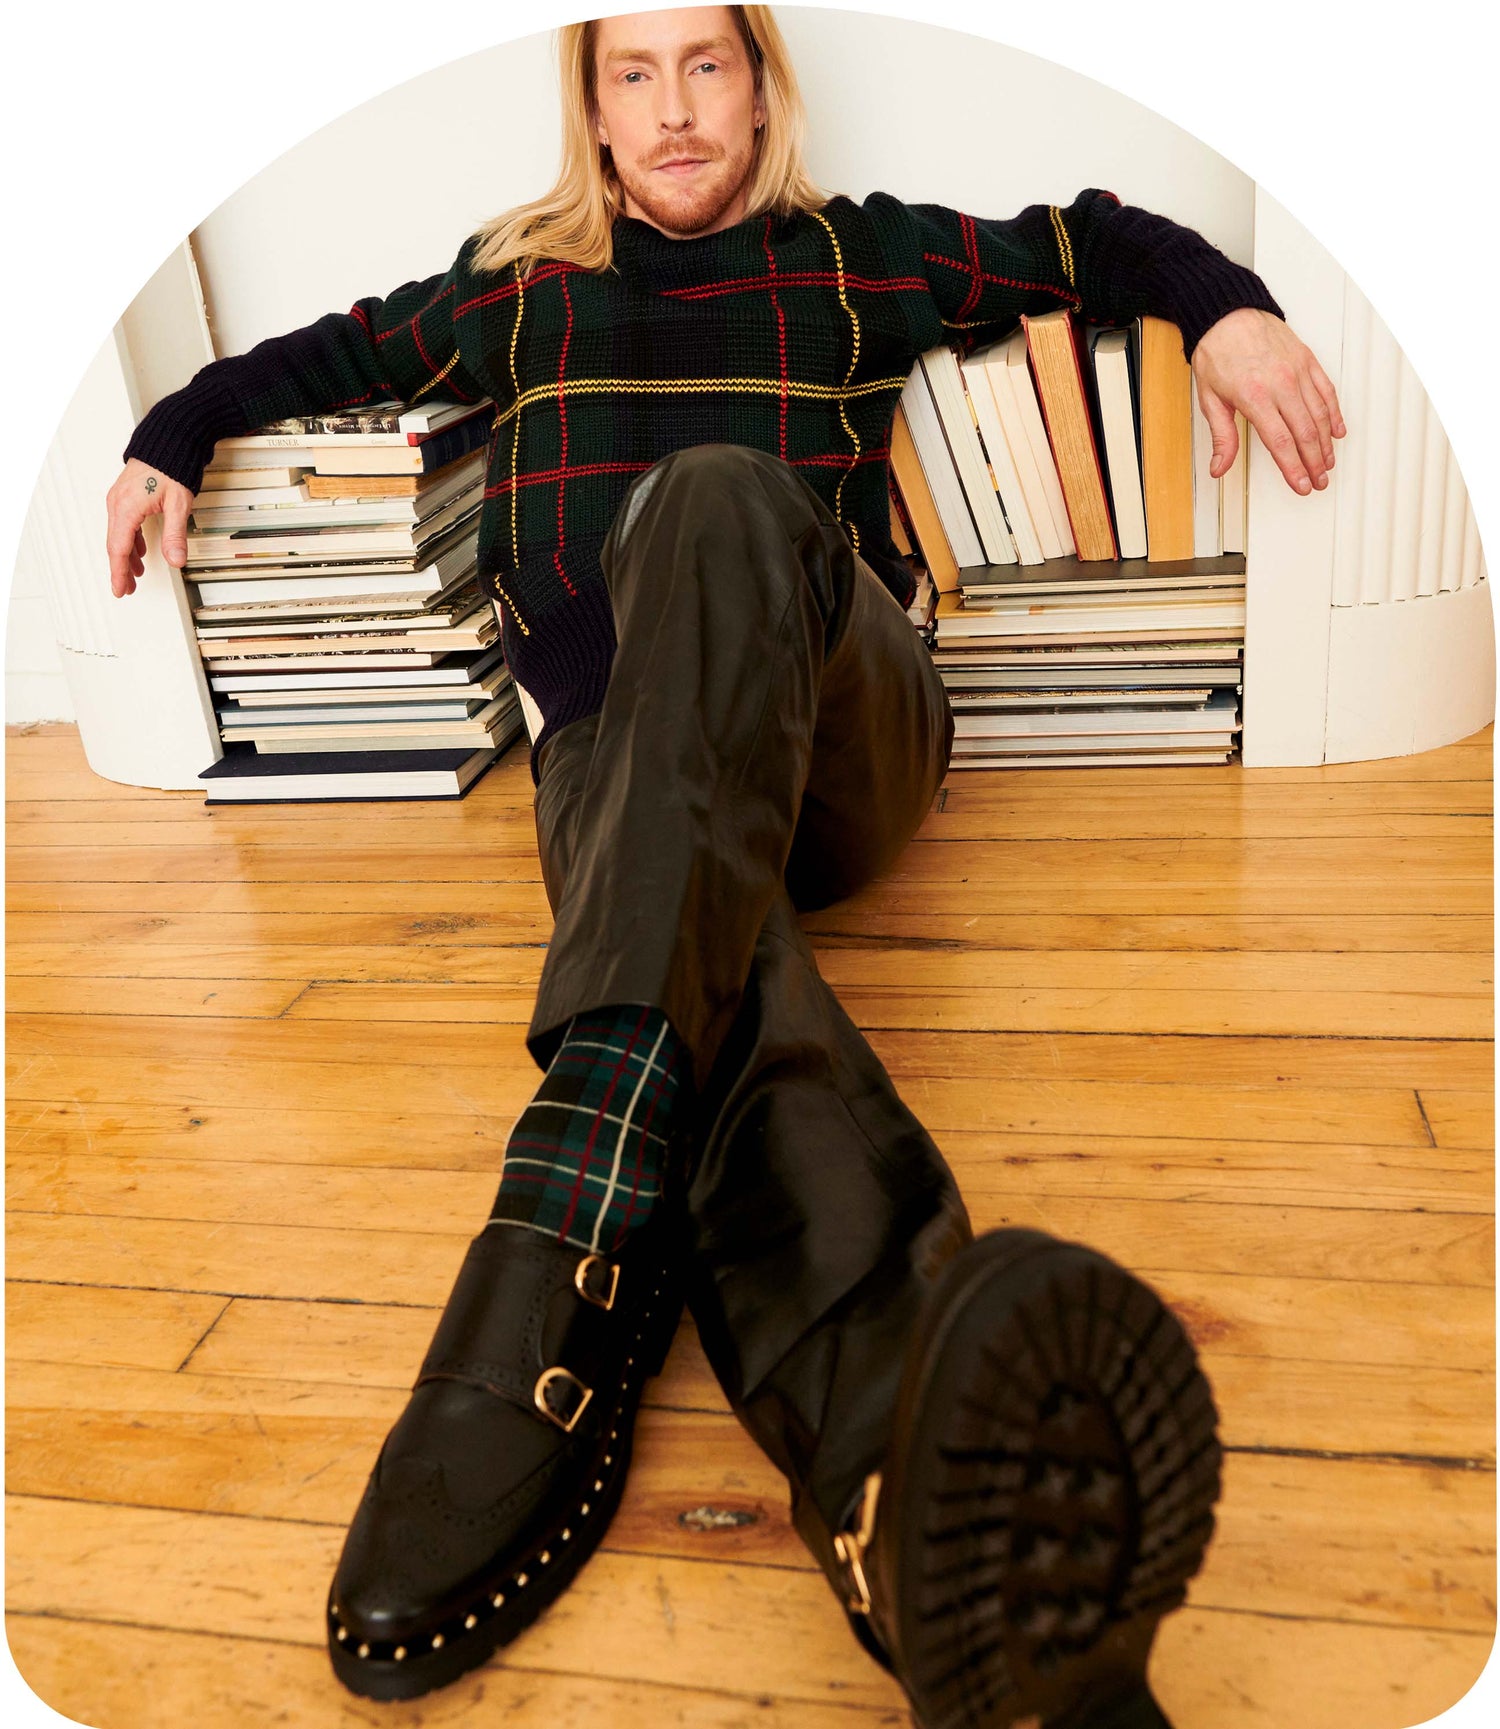 Kate, the double monk derby shoe with studs around the sole, is worn by a male model as he lounges comfortably against some books